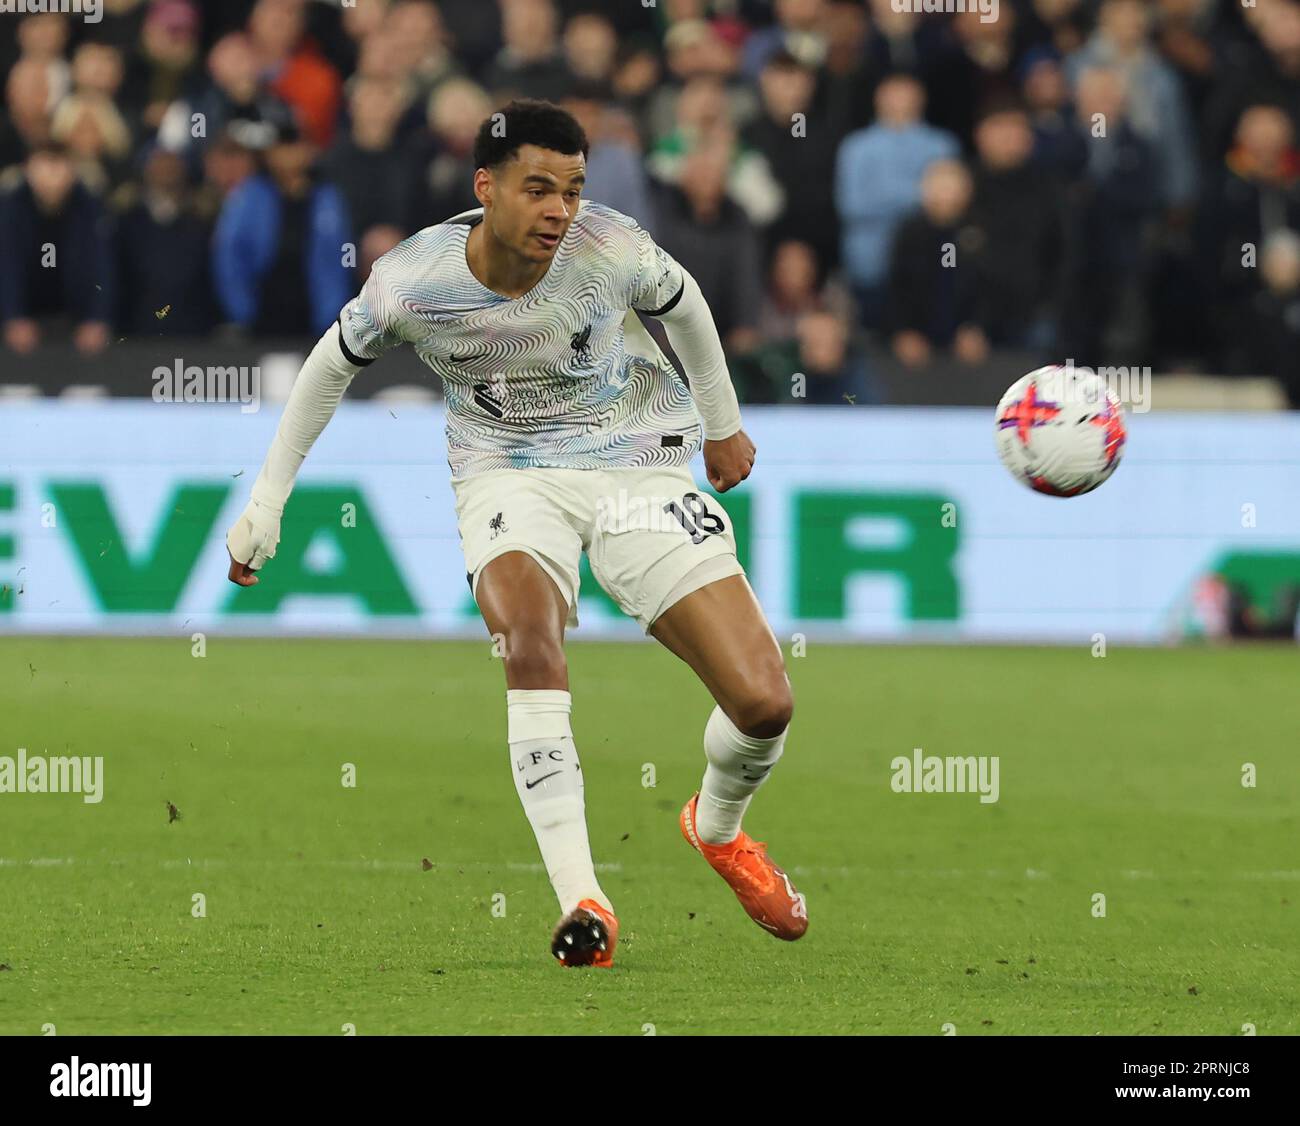 Liverpool's Cody Gakpo in action during English Premier League soccer match between West Ham United against Liverpool at London stadium, London on 26t Stock Photo